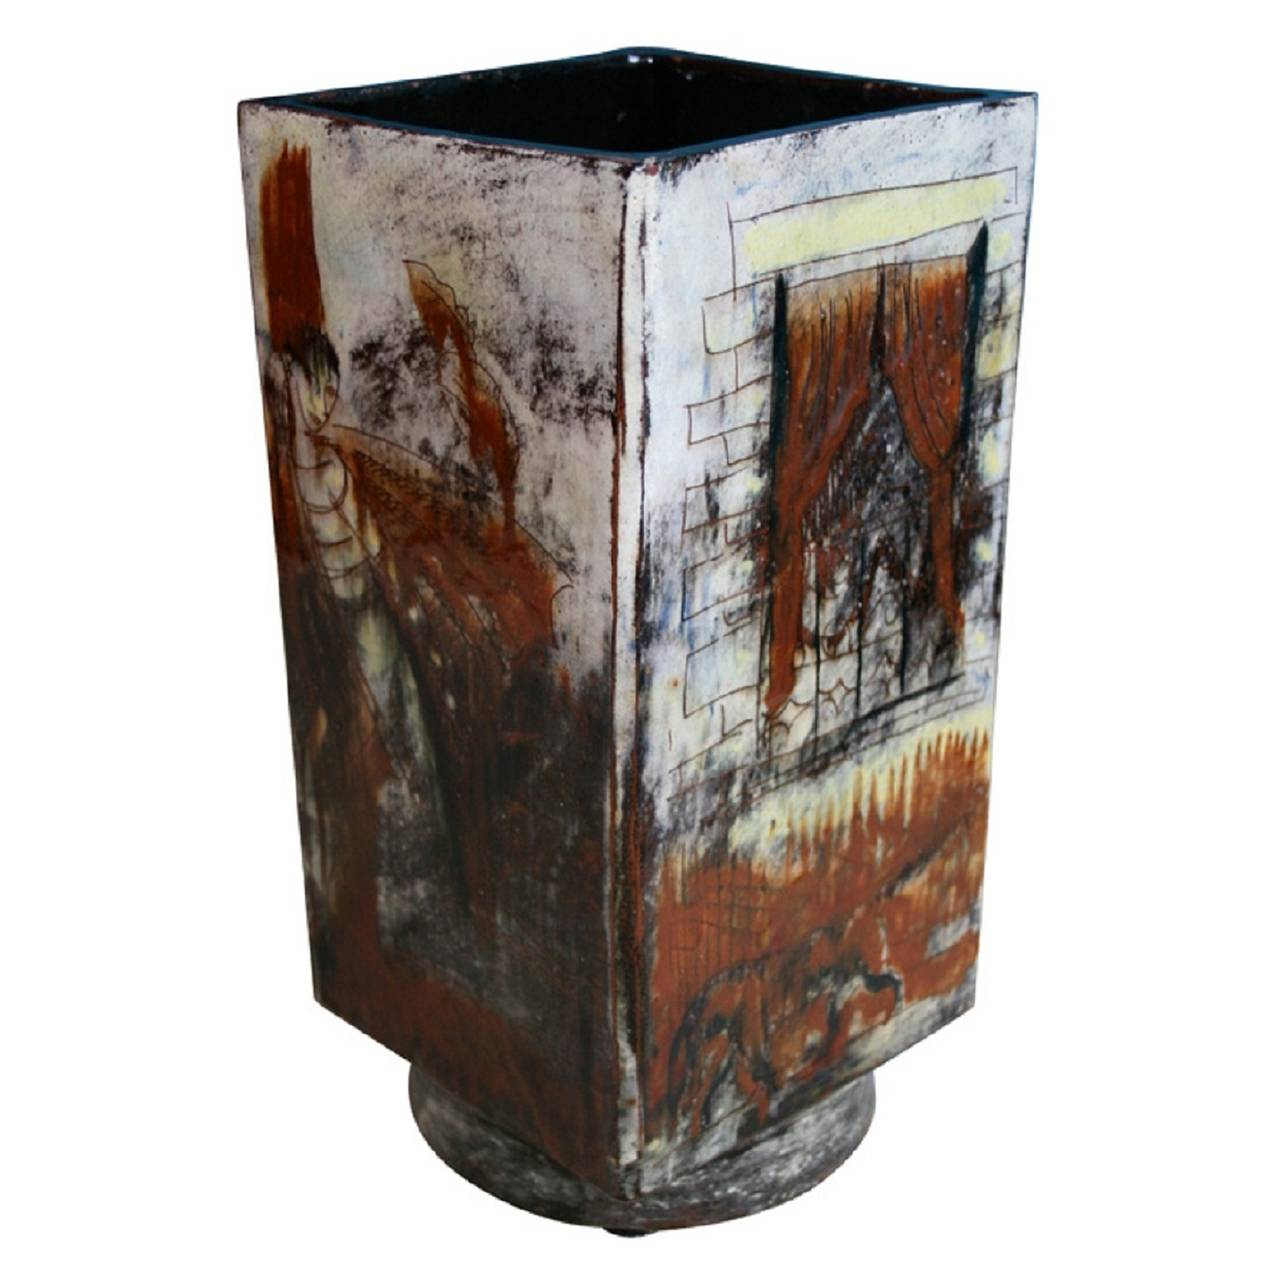 Square form stoneware vase decorated with a Venice scene, signed and dated by Henry Varnum Poor, American, 1932. Measures: 14 1/2